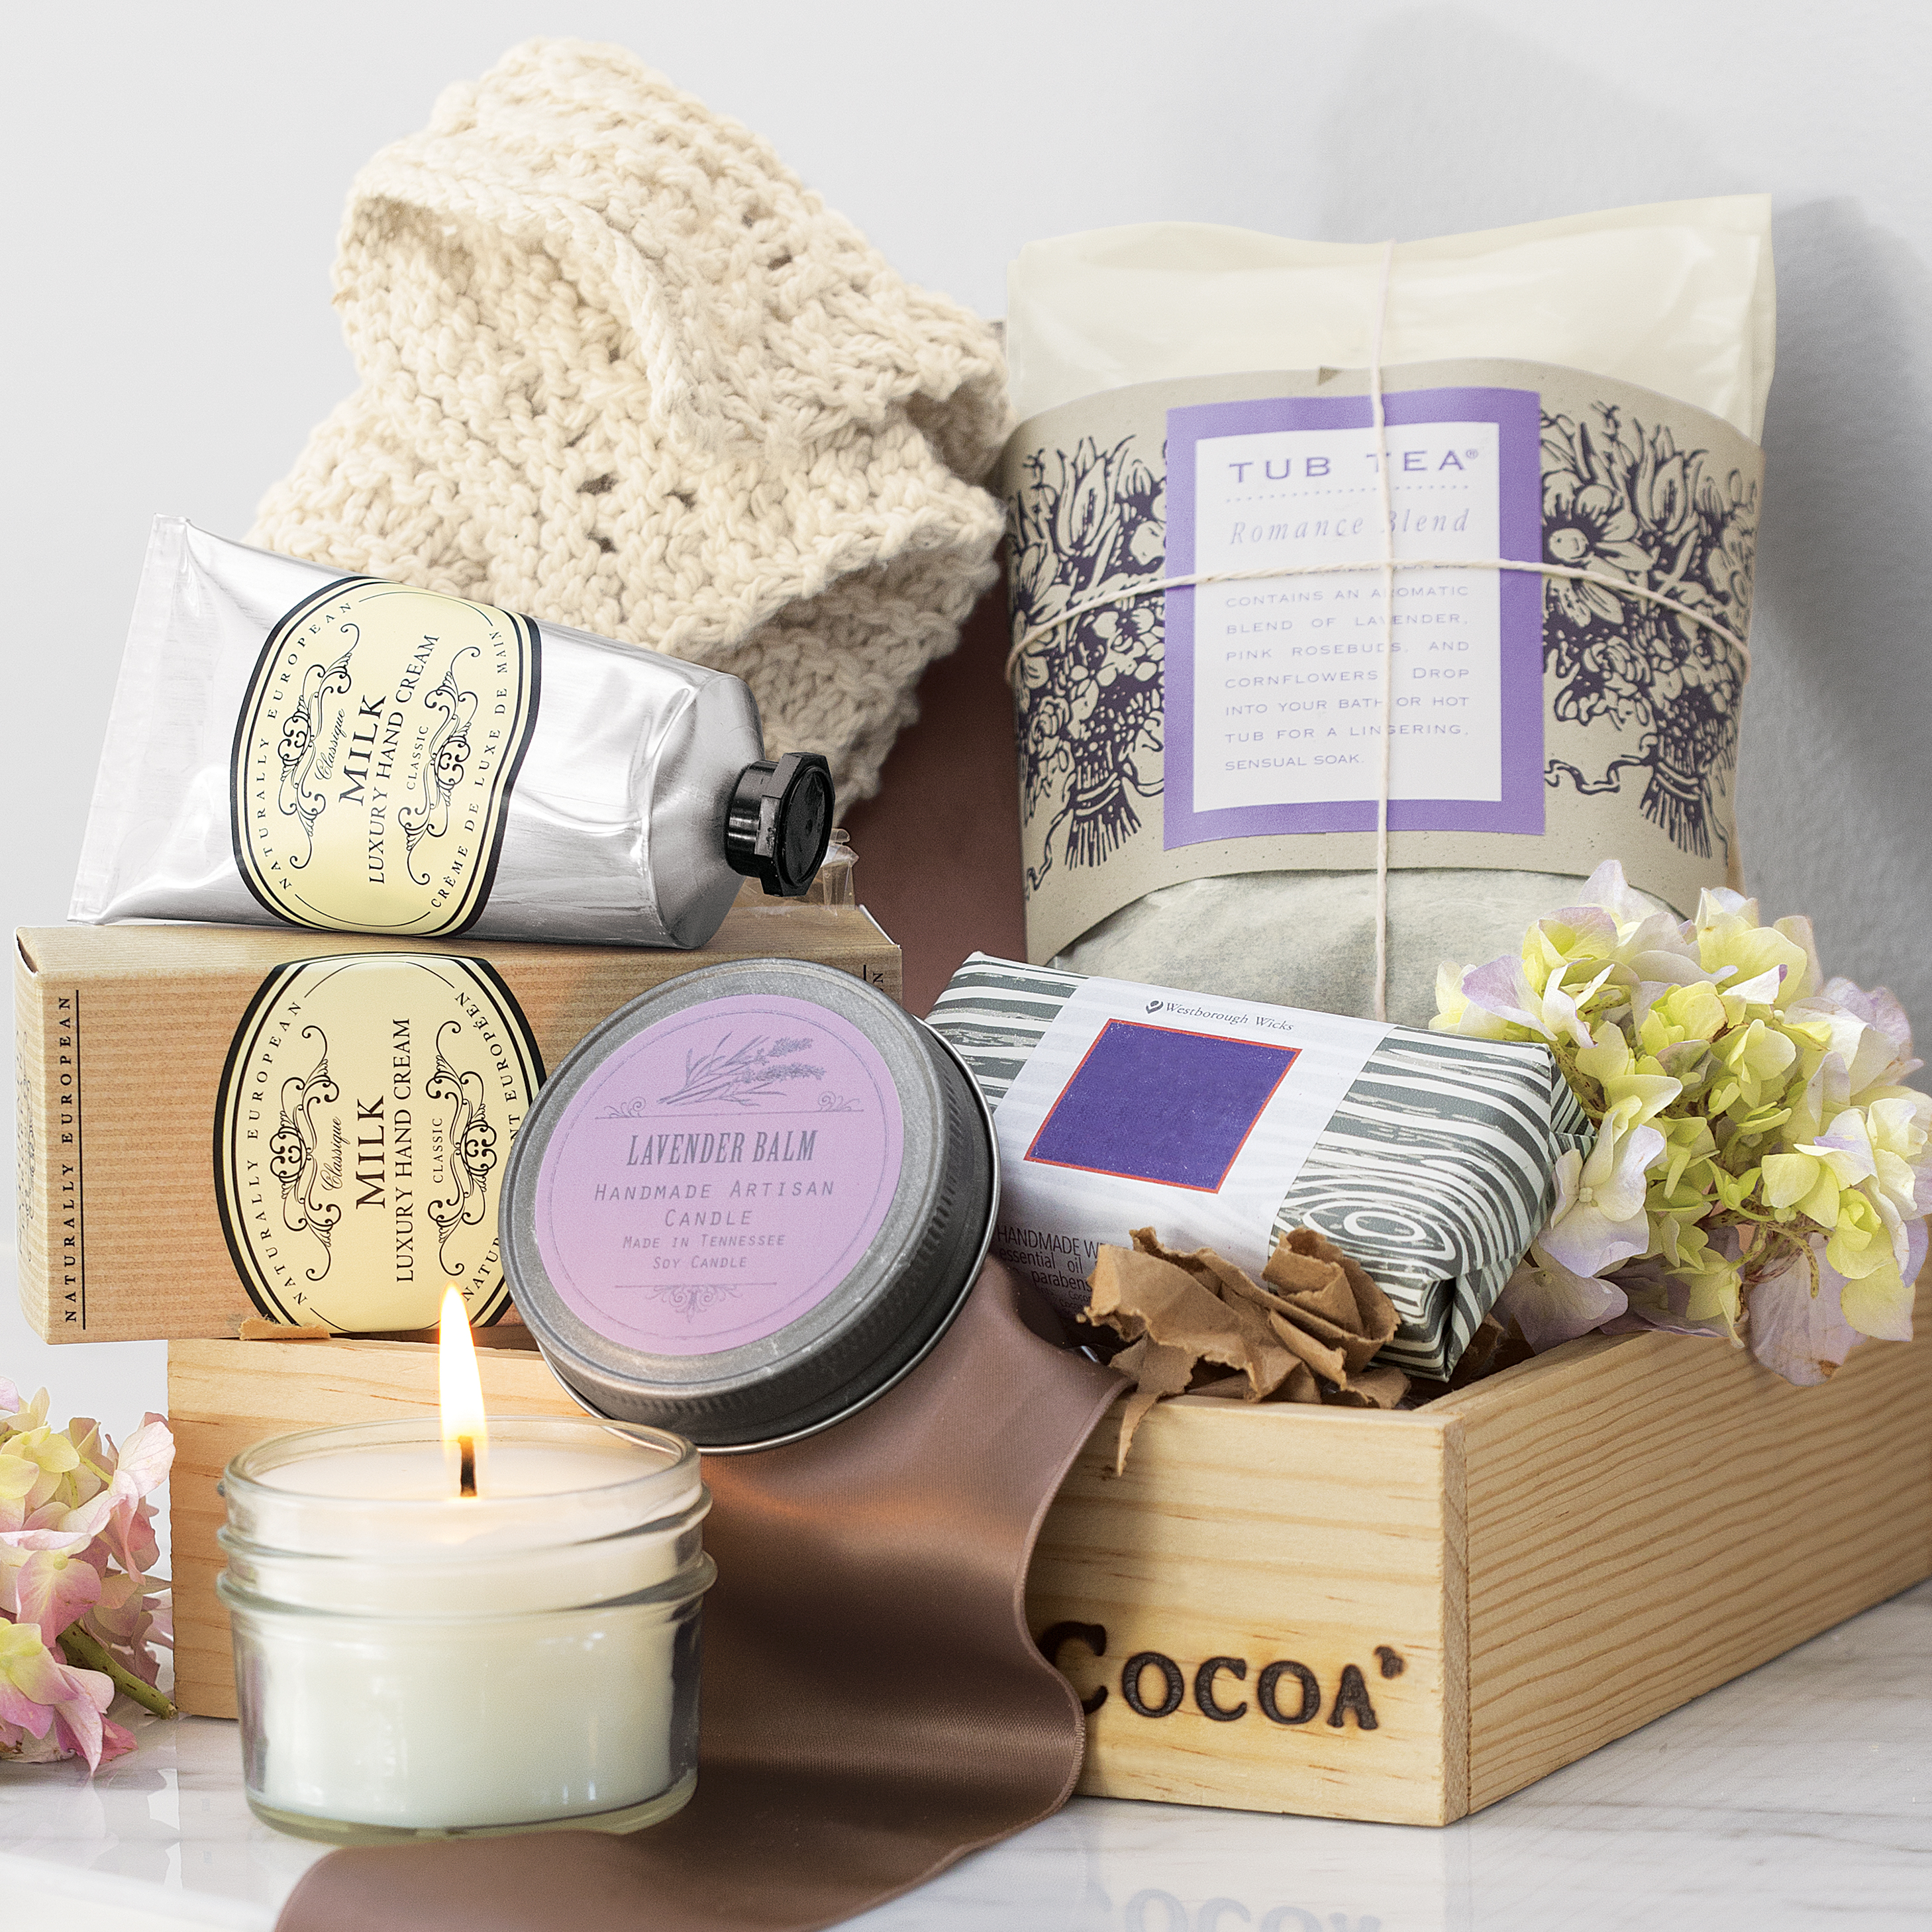 https://www.oliveandcocoa.com/images/uploads/11222_Serenity_Spa_Crate_updated_P.jpg